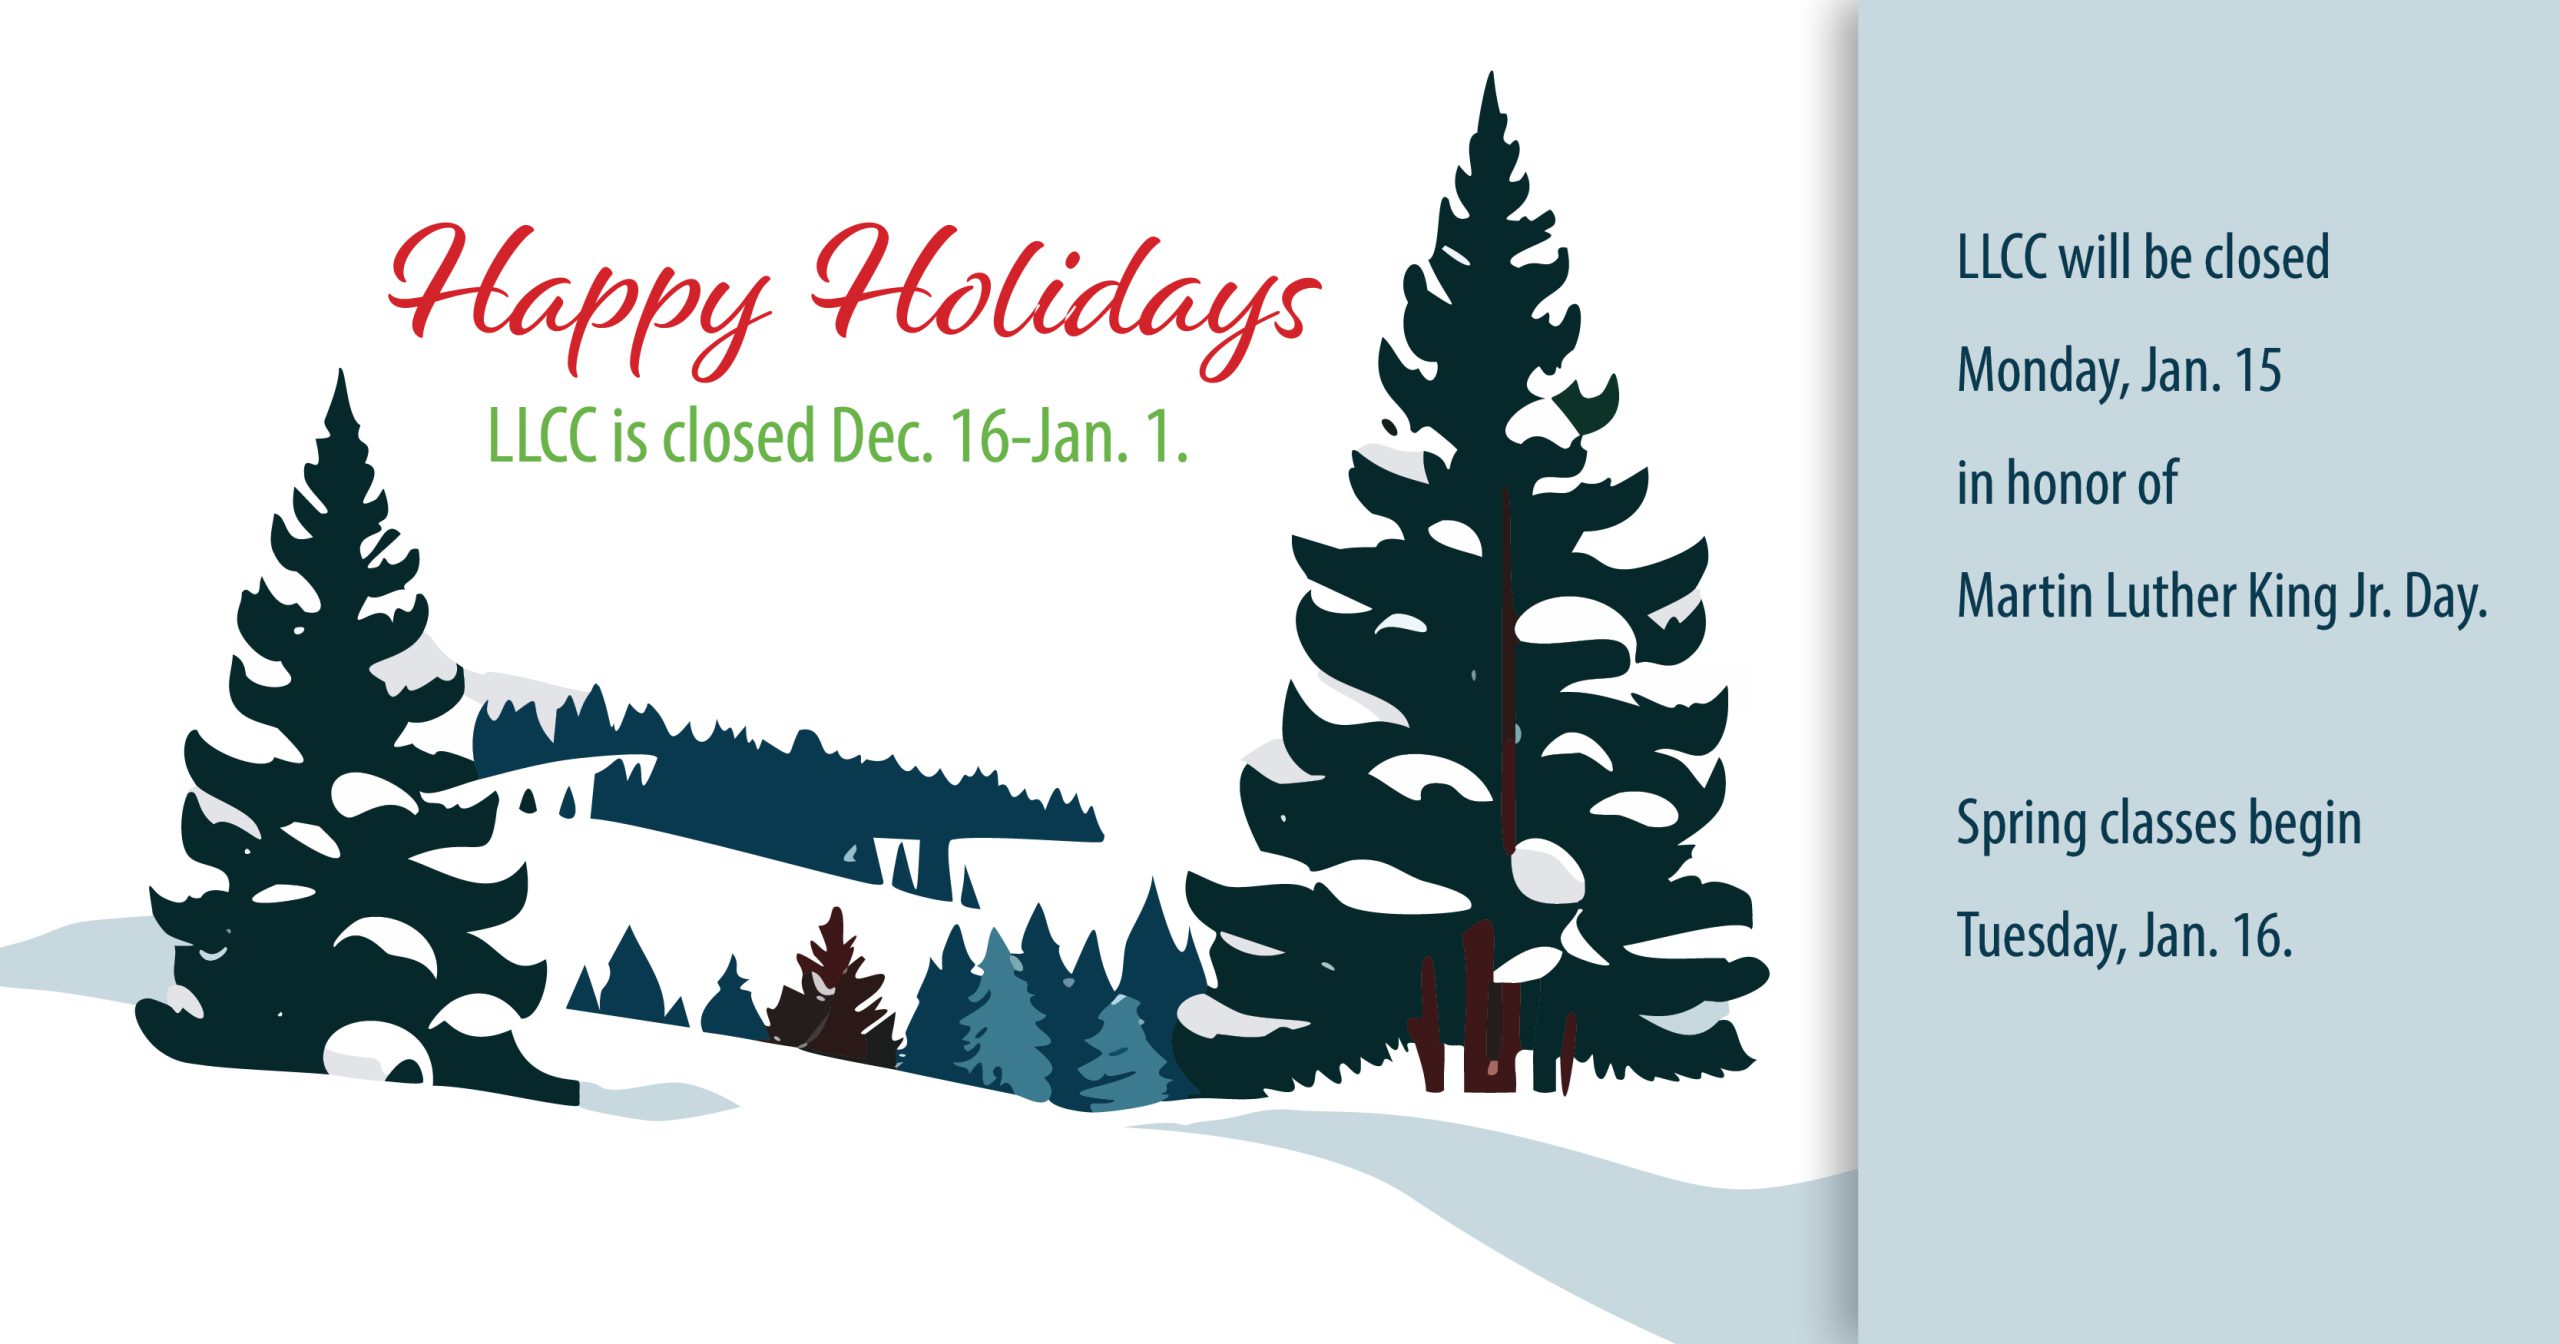 Happy Holidays. LLCC is closed Dec. 16-Jan. 1. LLCC will be closed Monday, Jan. 15 in honor of Martin Luther King Jr. Day. Spring classes begin Tuesday, Jan. 16.